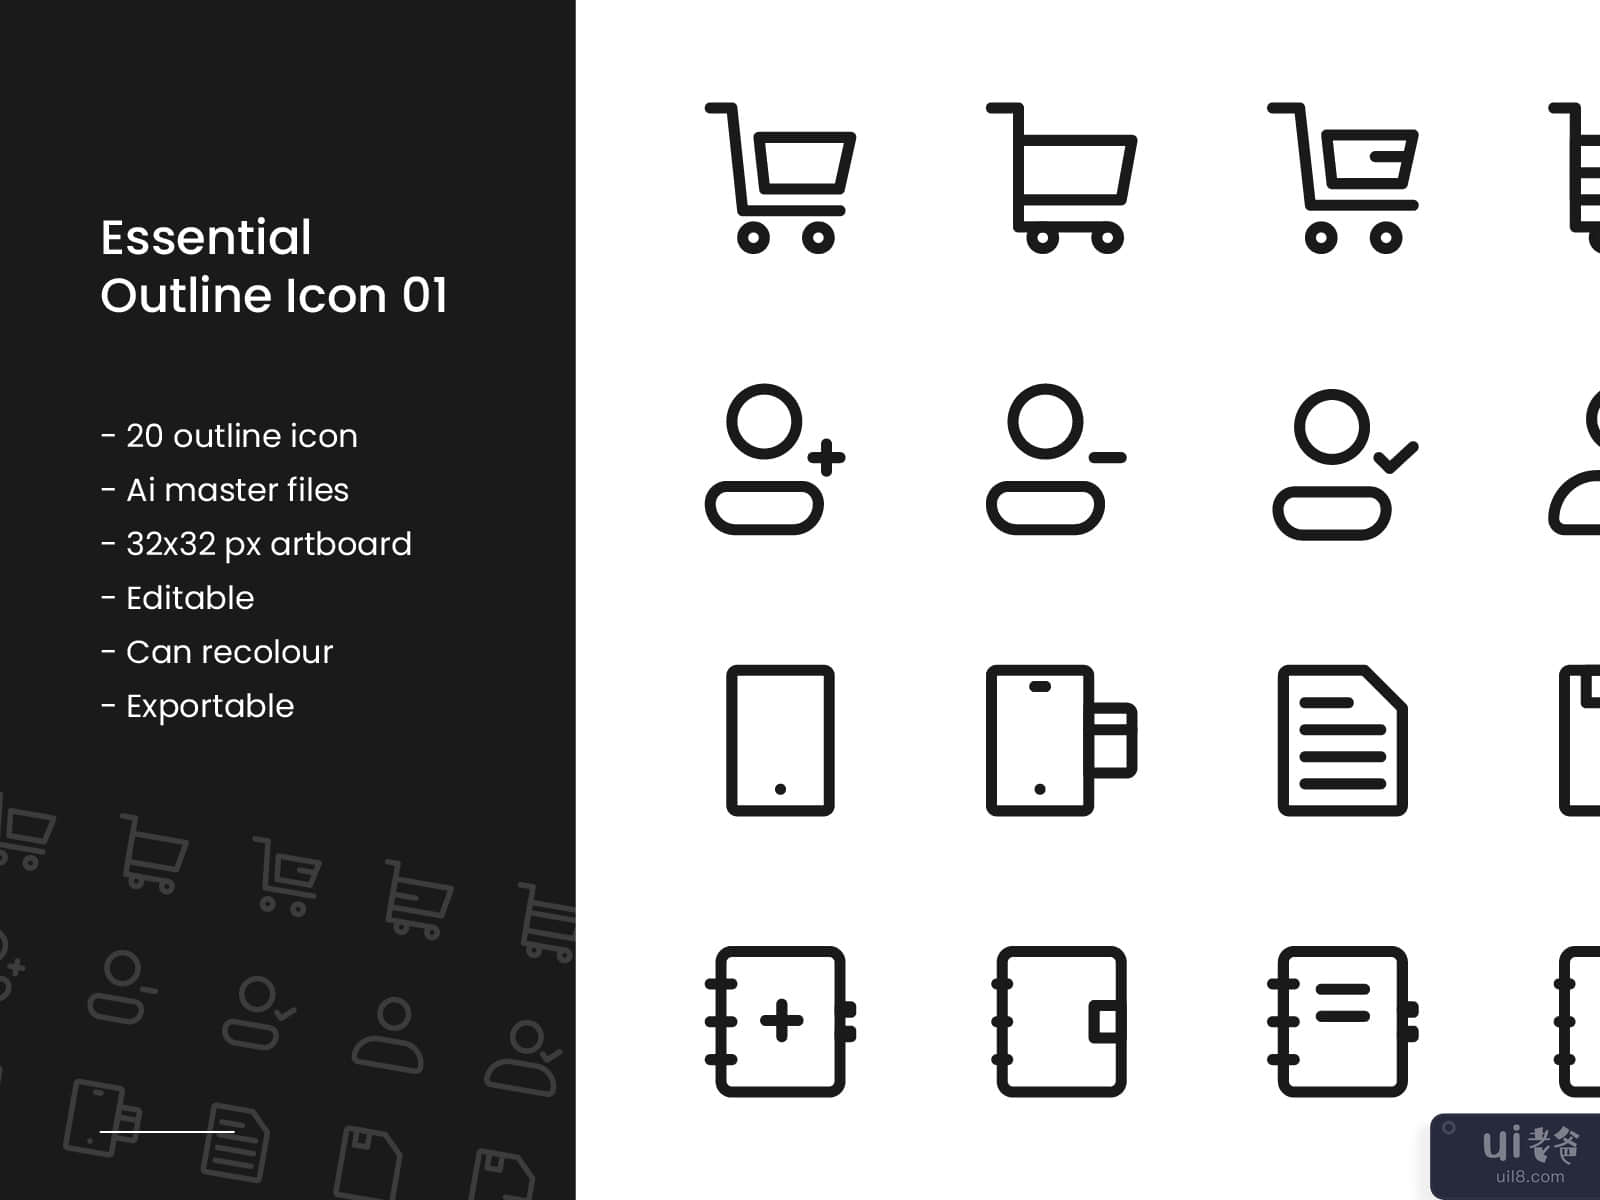 Essential Outline Icon 02